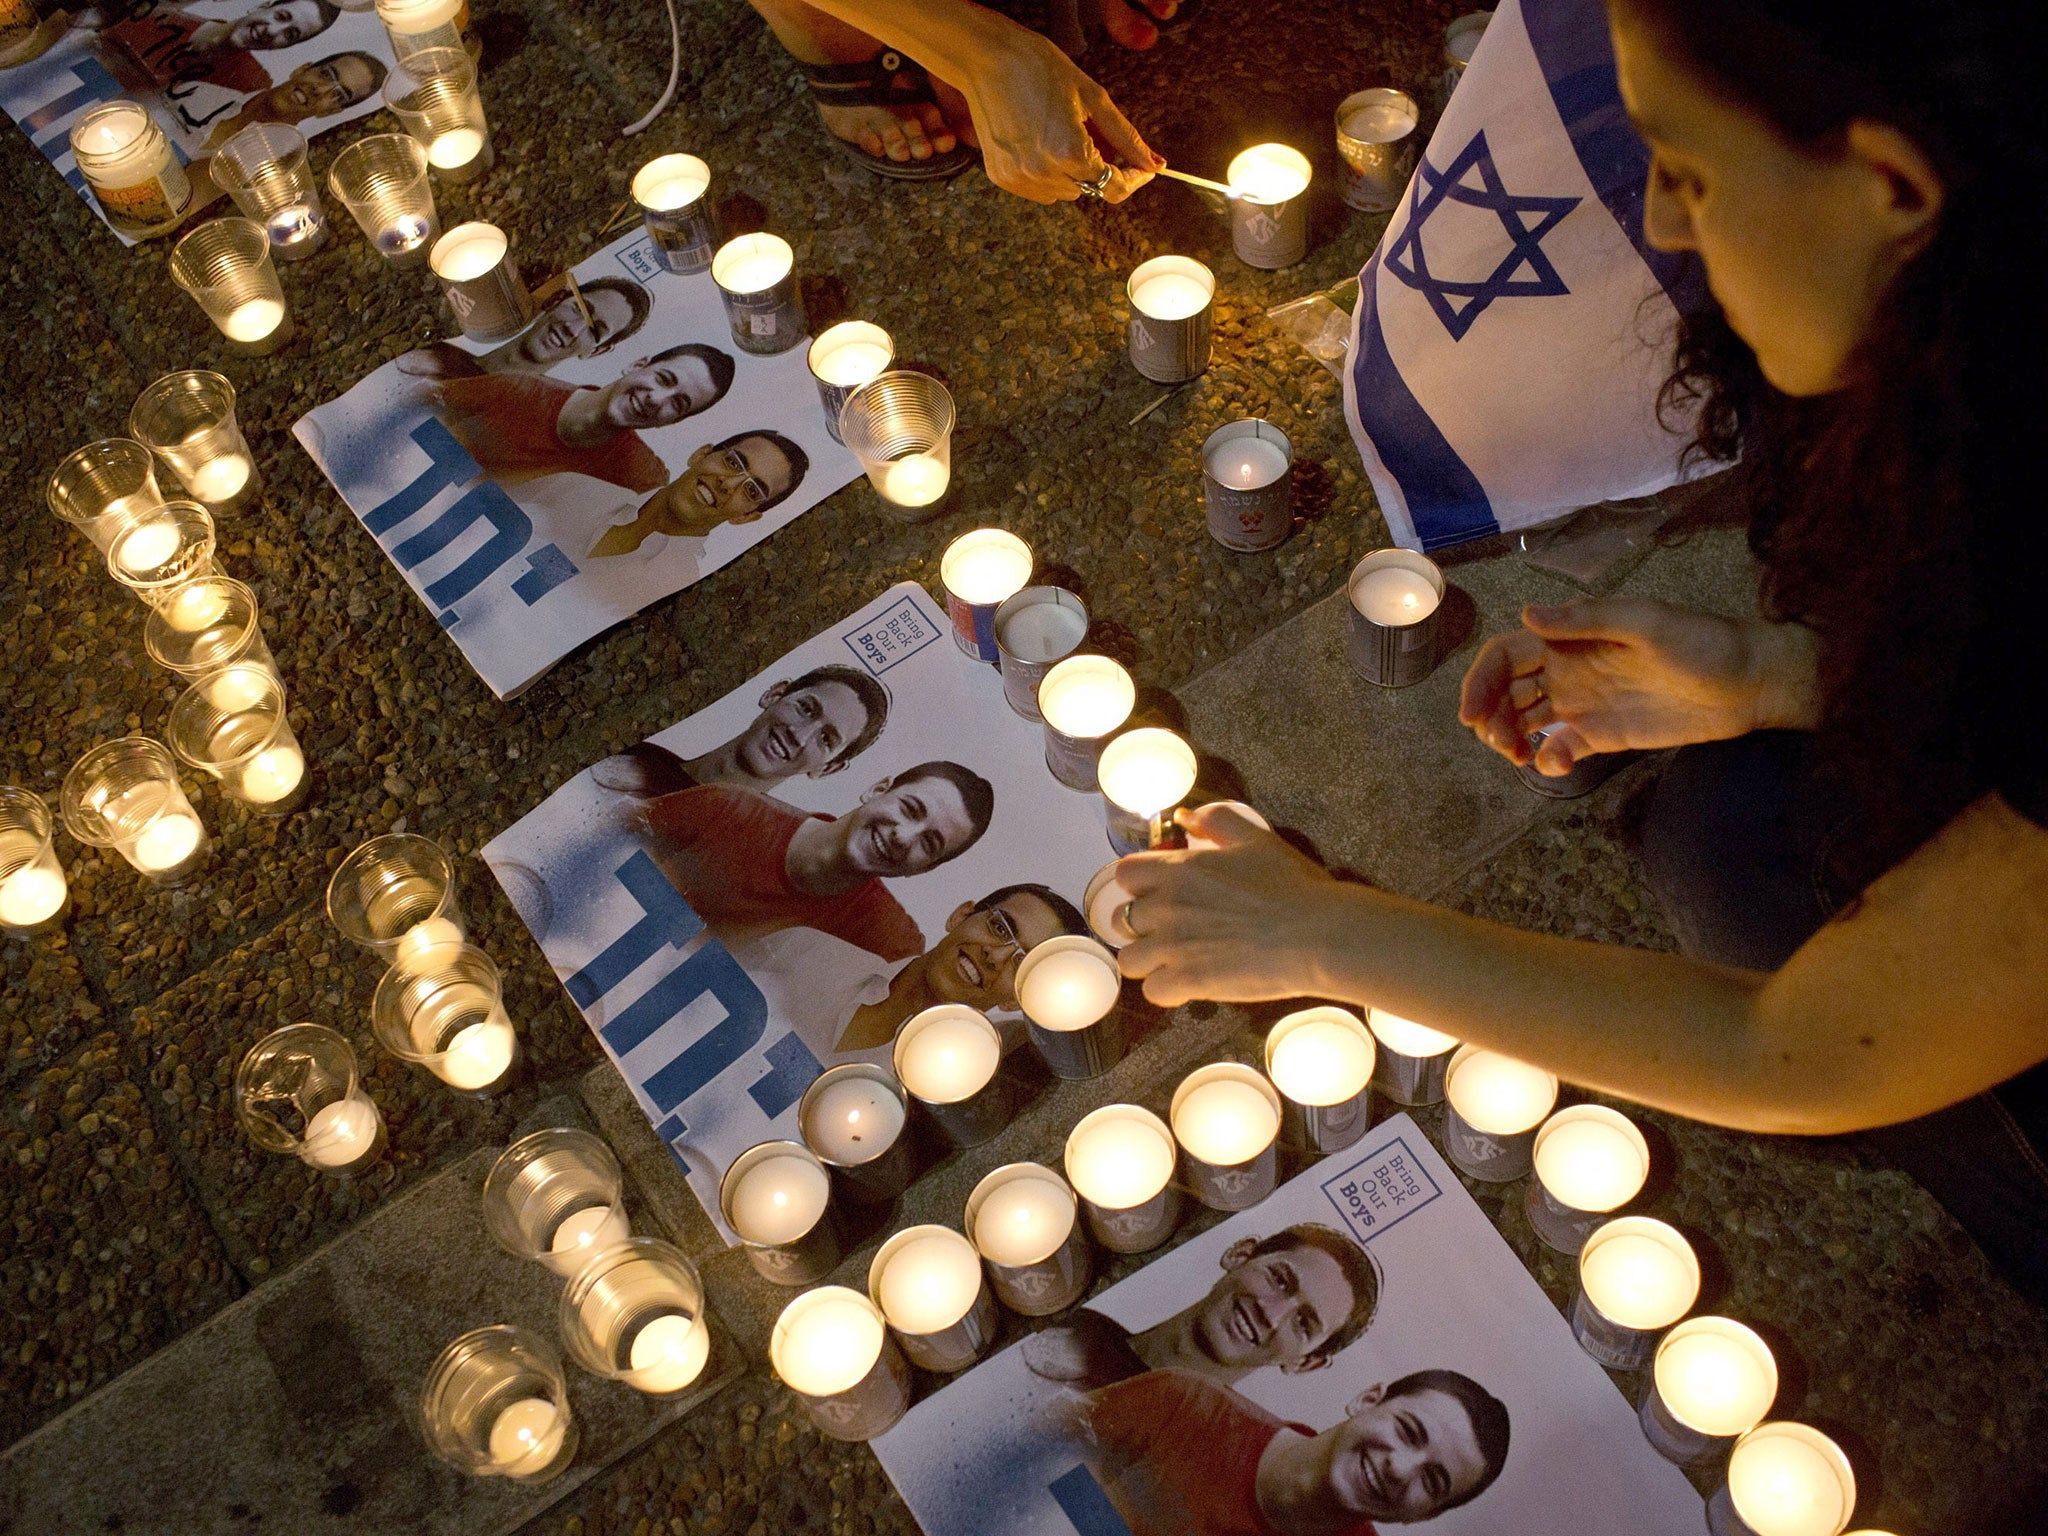 Israelis mourns and light candles in Rabin Square in Tel Aviv after the announce that the bodies of the three missing Israeli teenagers were found. Israel confirmed finding the bodies of three teenagers who disappeared in the southern West Bank, blaming t